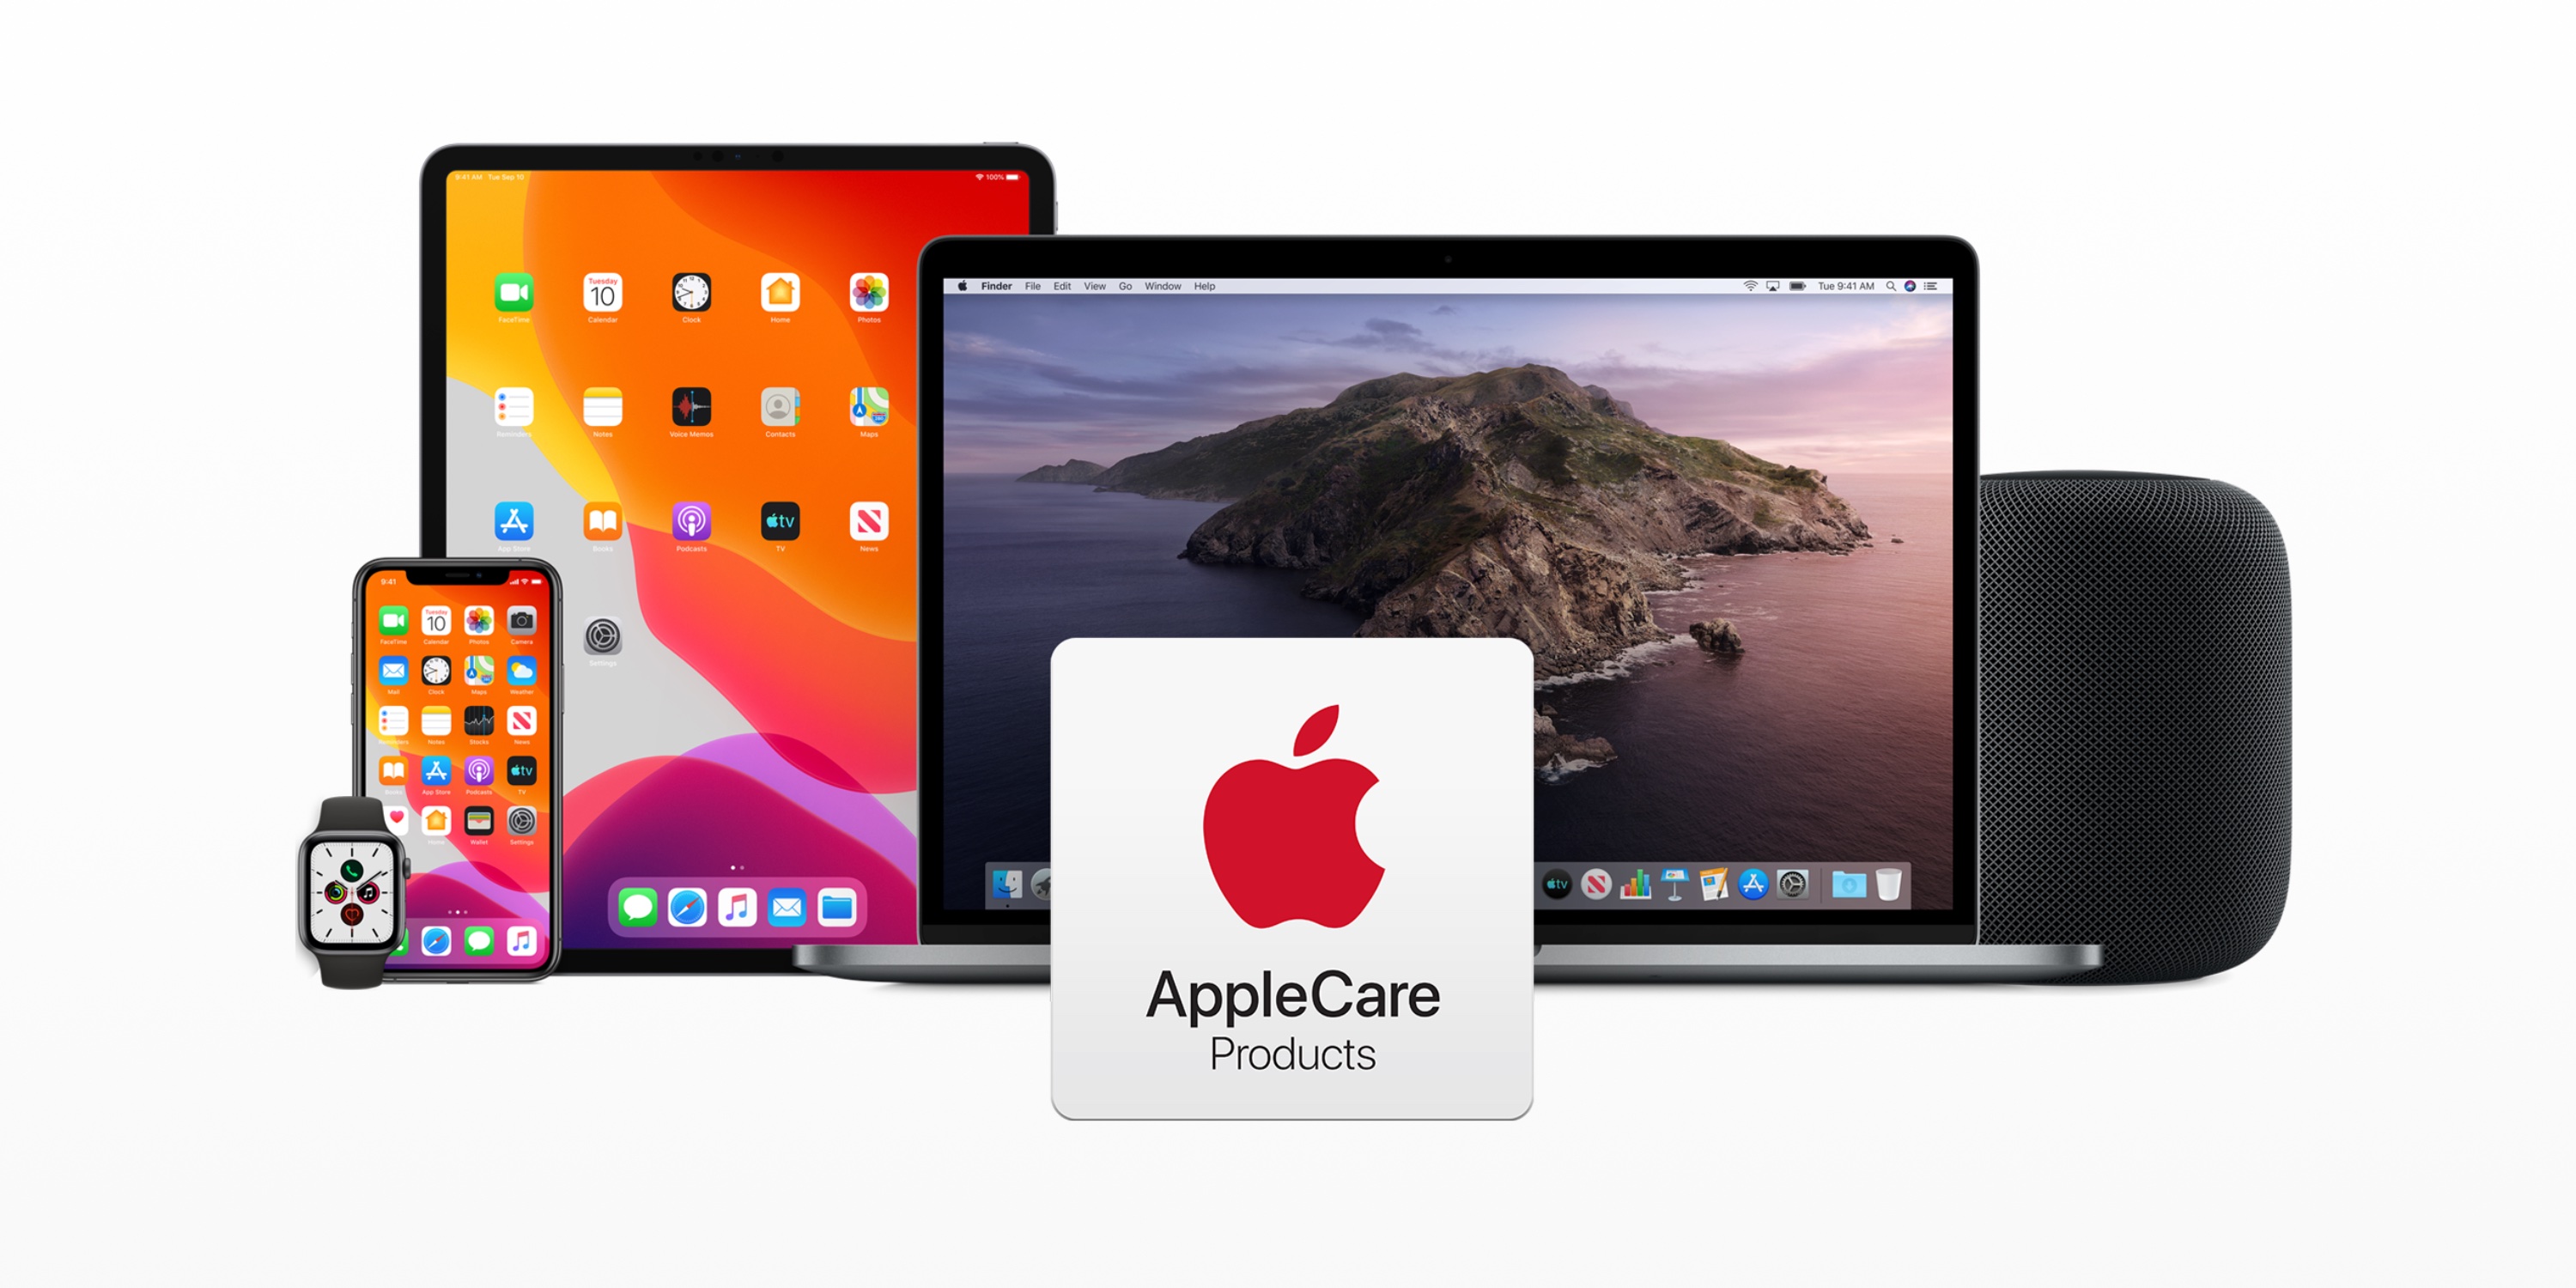 Is AppleCare worth the price? - 9to5Mac